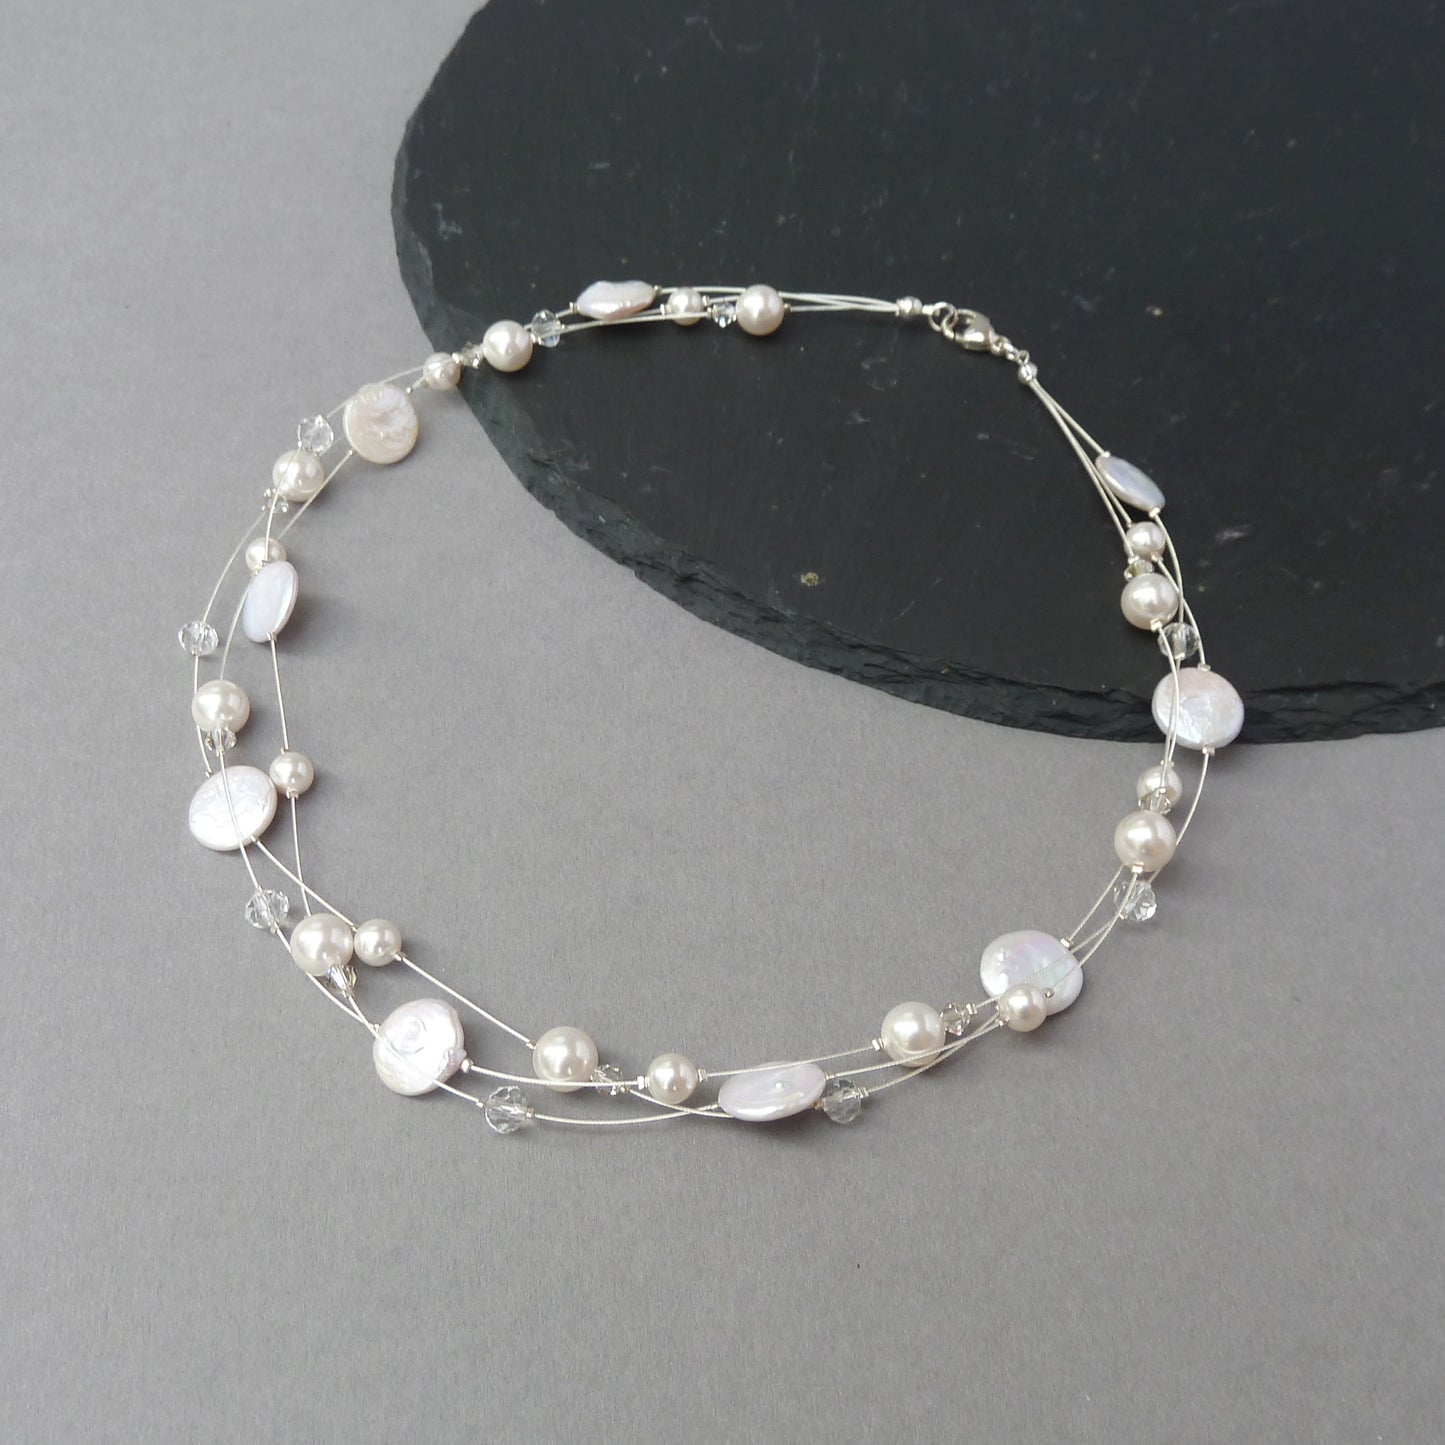 White pearl bridesmaids necklaces